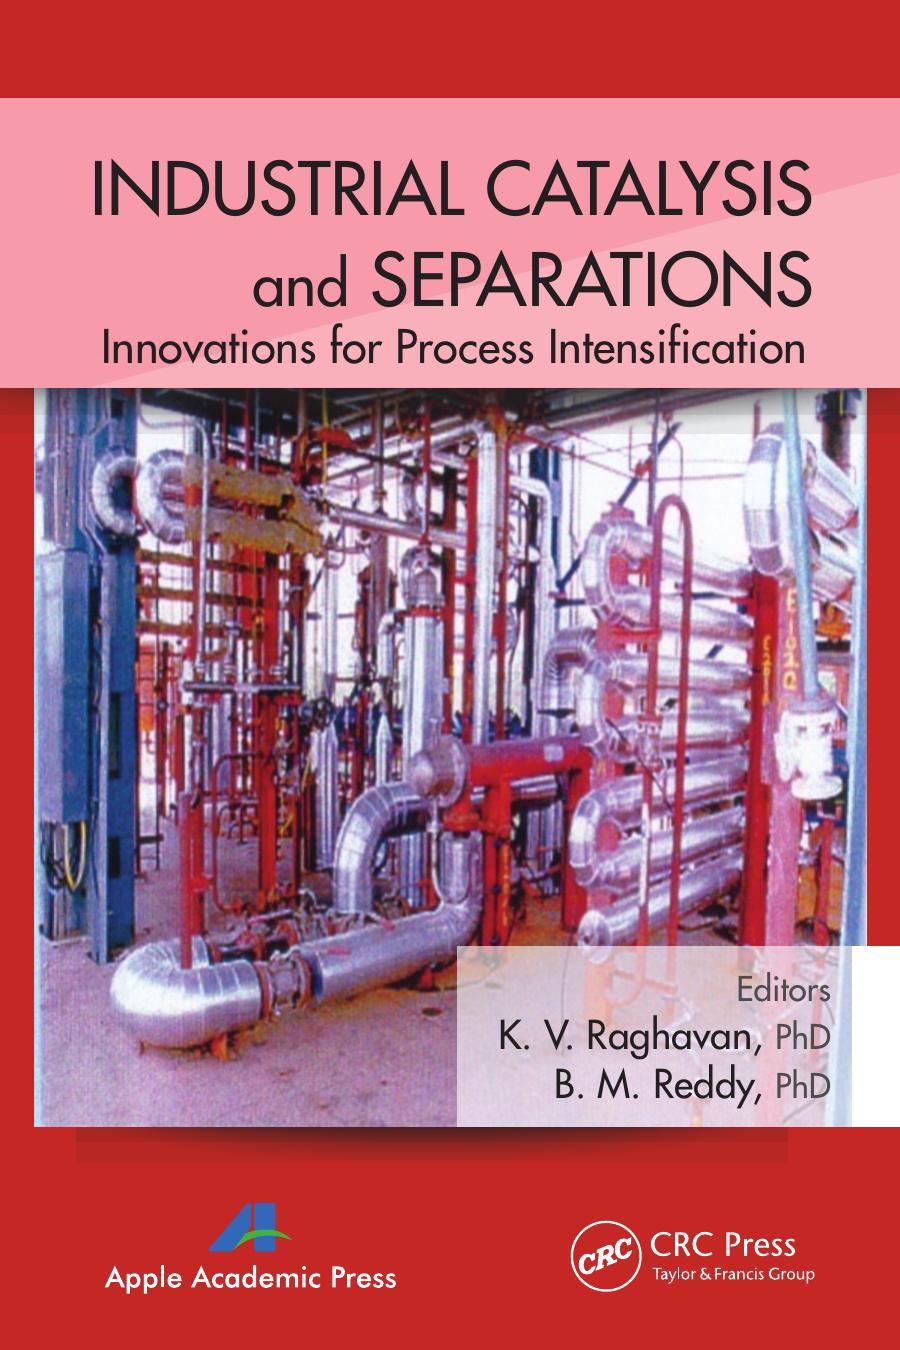 Industrial Catalysis and Separations: Innovations for Process Intensification